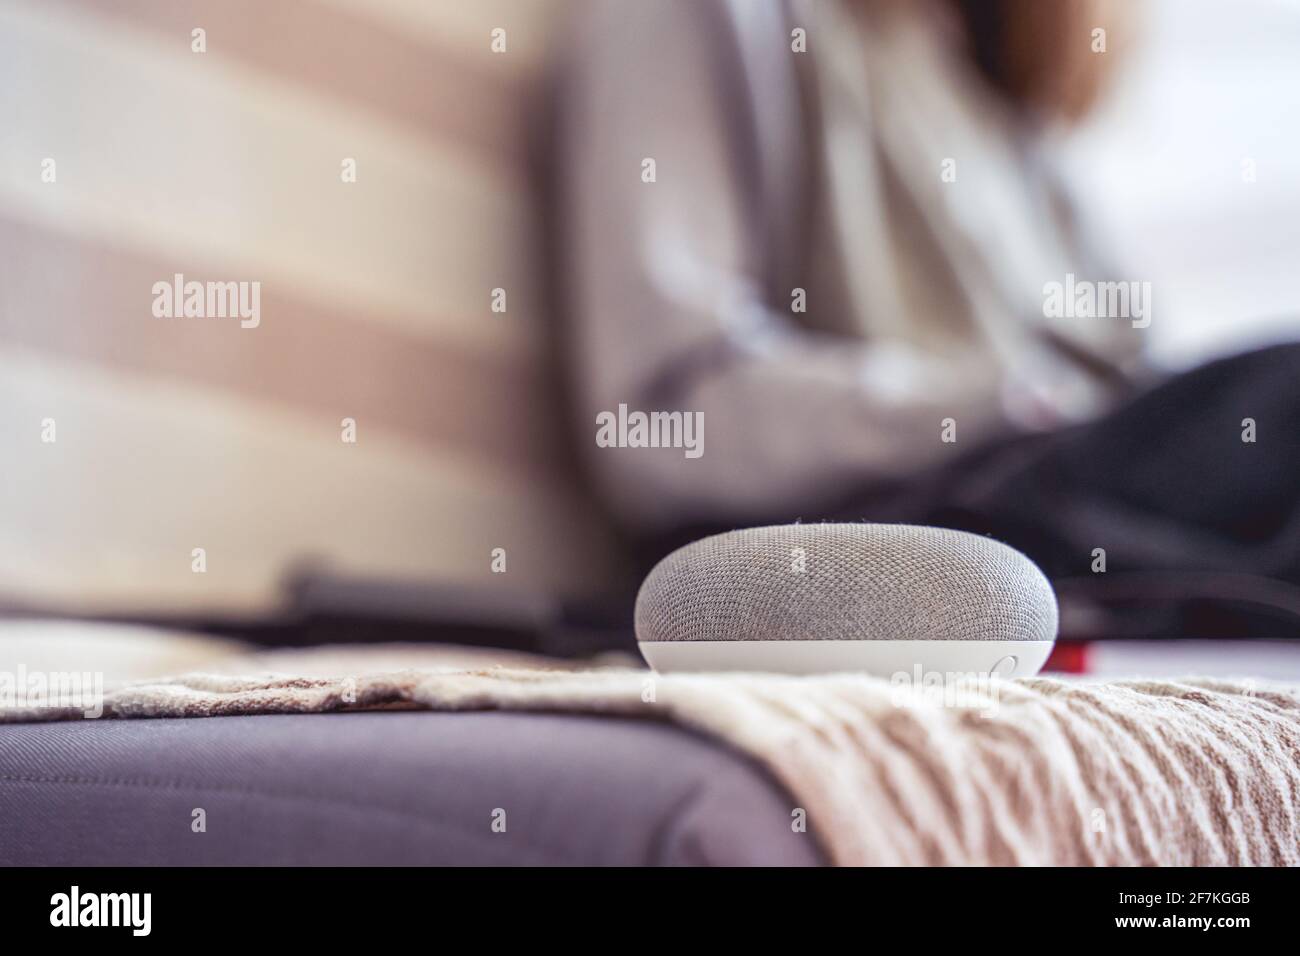 voice controlled smart speaker in a interior. female working in background Stock Photo